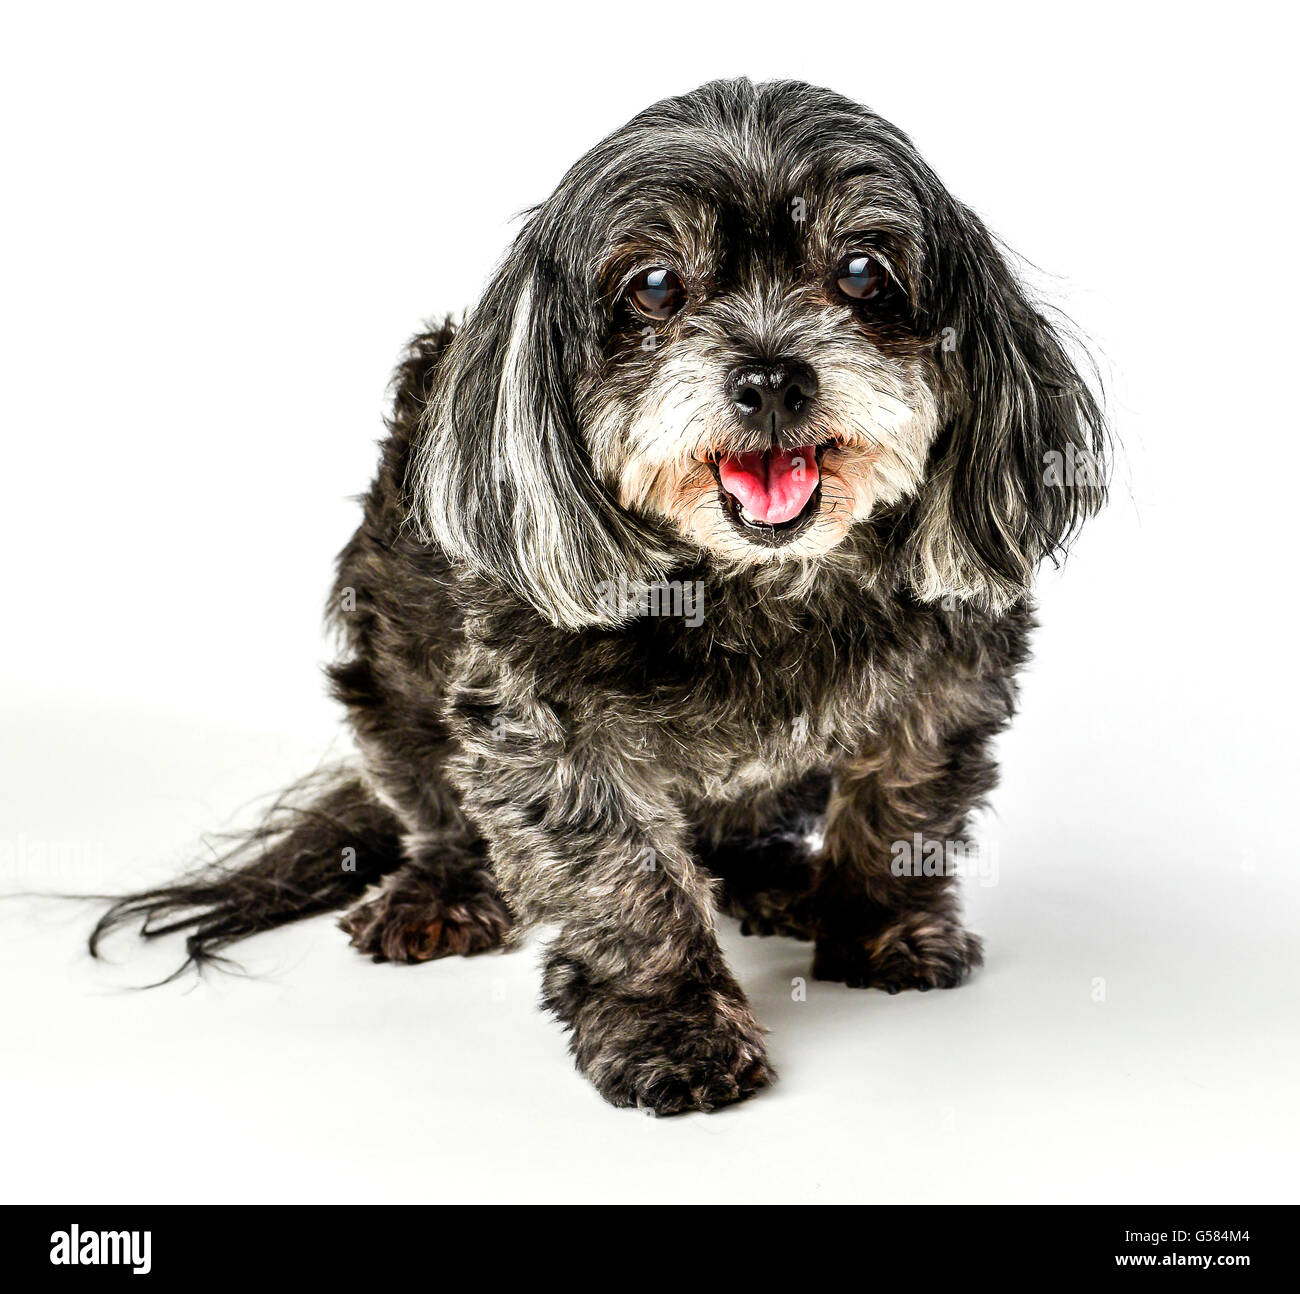 An adorable dark tri-colored mixed breed small dog with tongue out posing and smiling and walking on white background Stock Photo